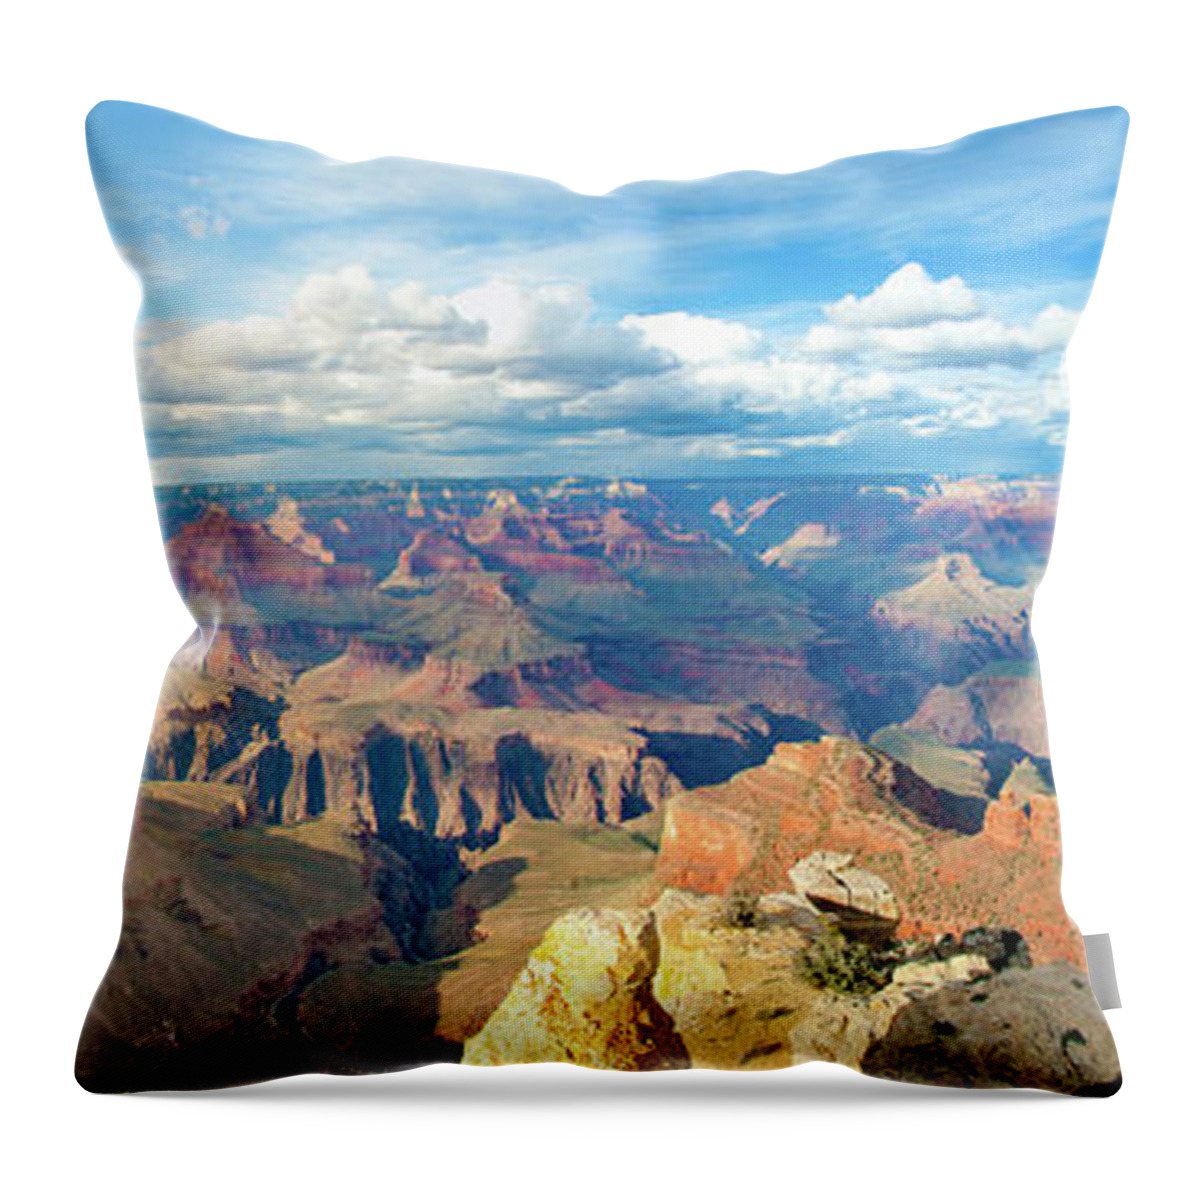 Scenics Throw Pillow featuring the photograph Grand Canyon In Arizona, Usa #3 by Asier